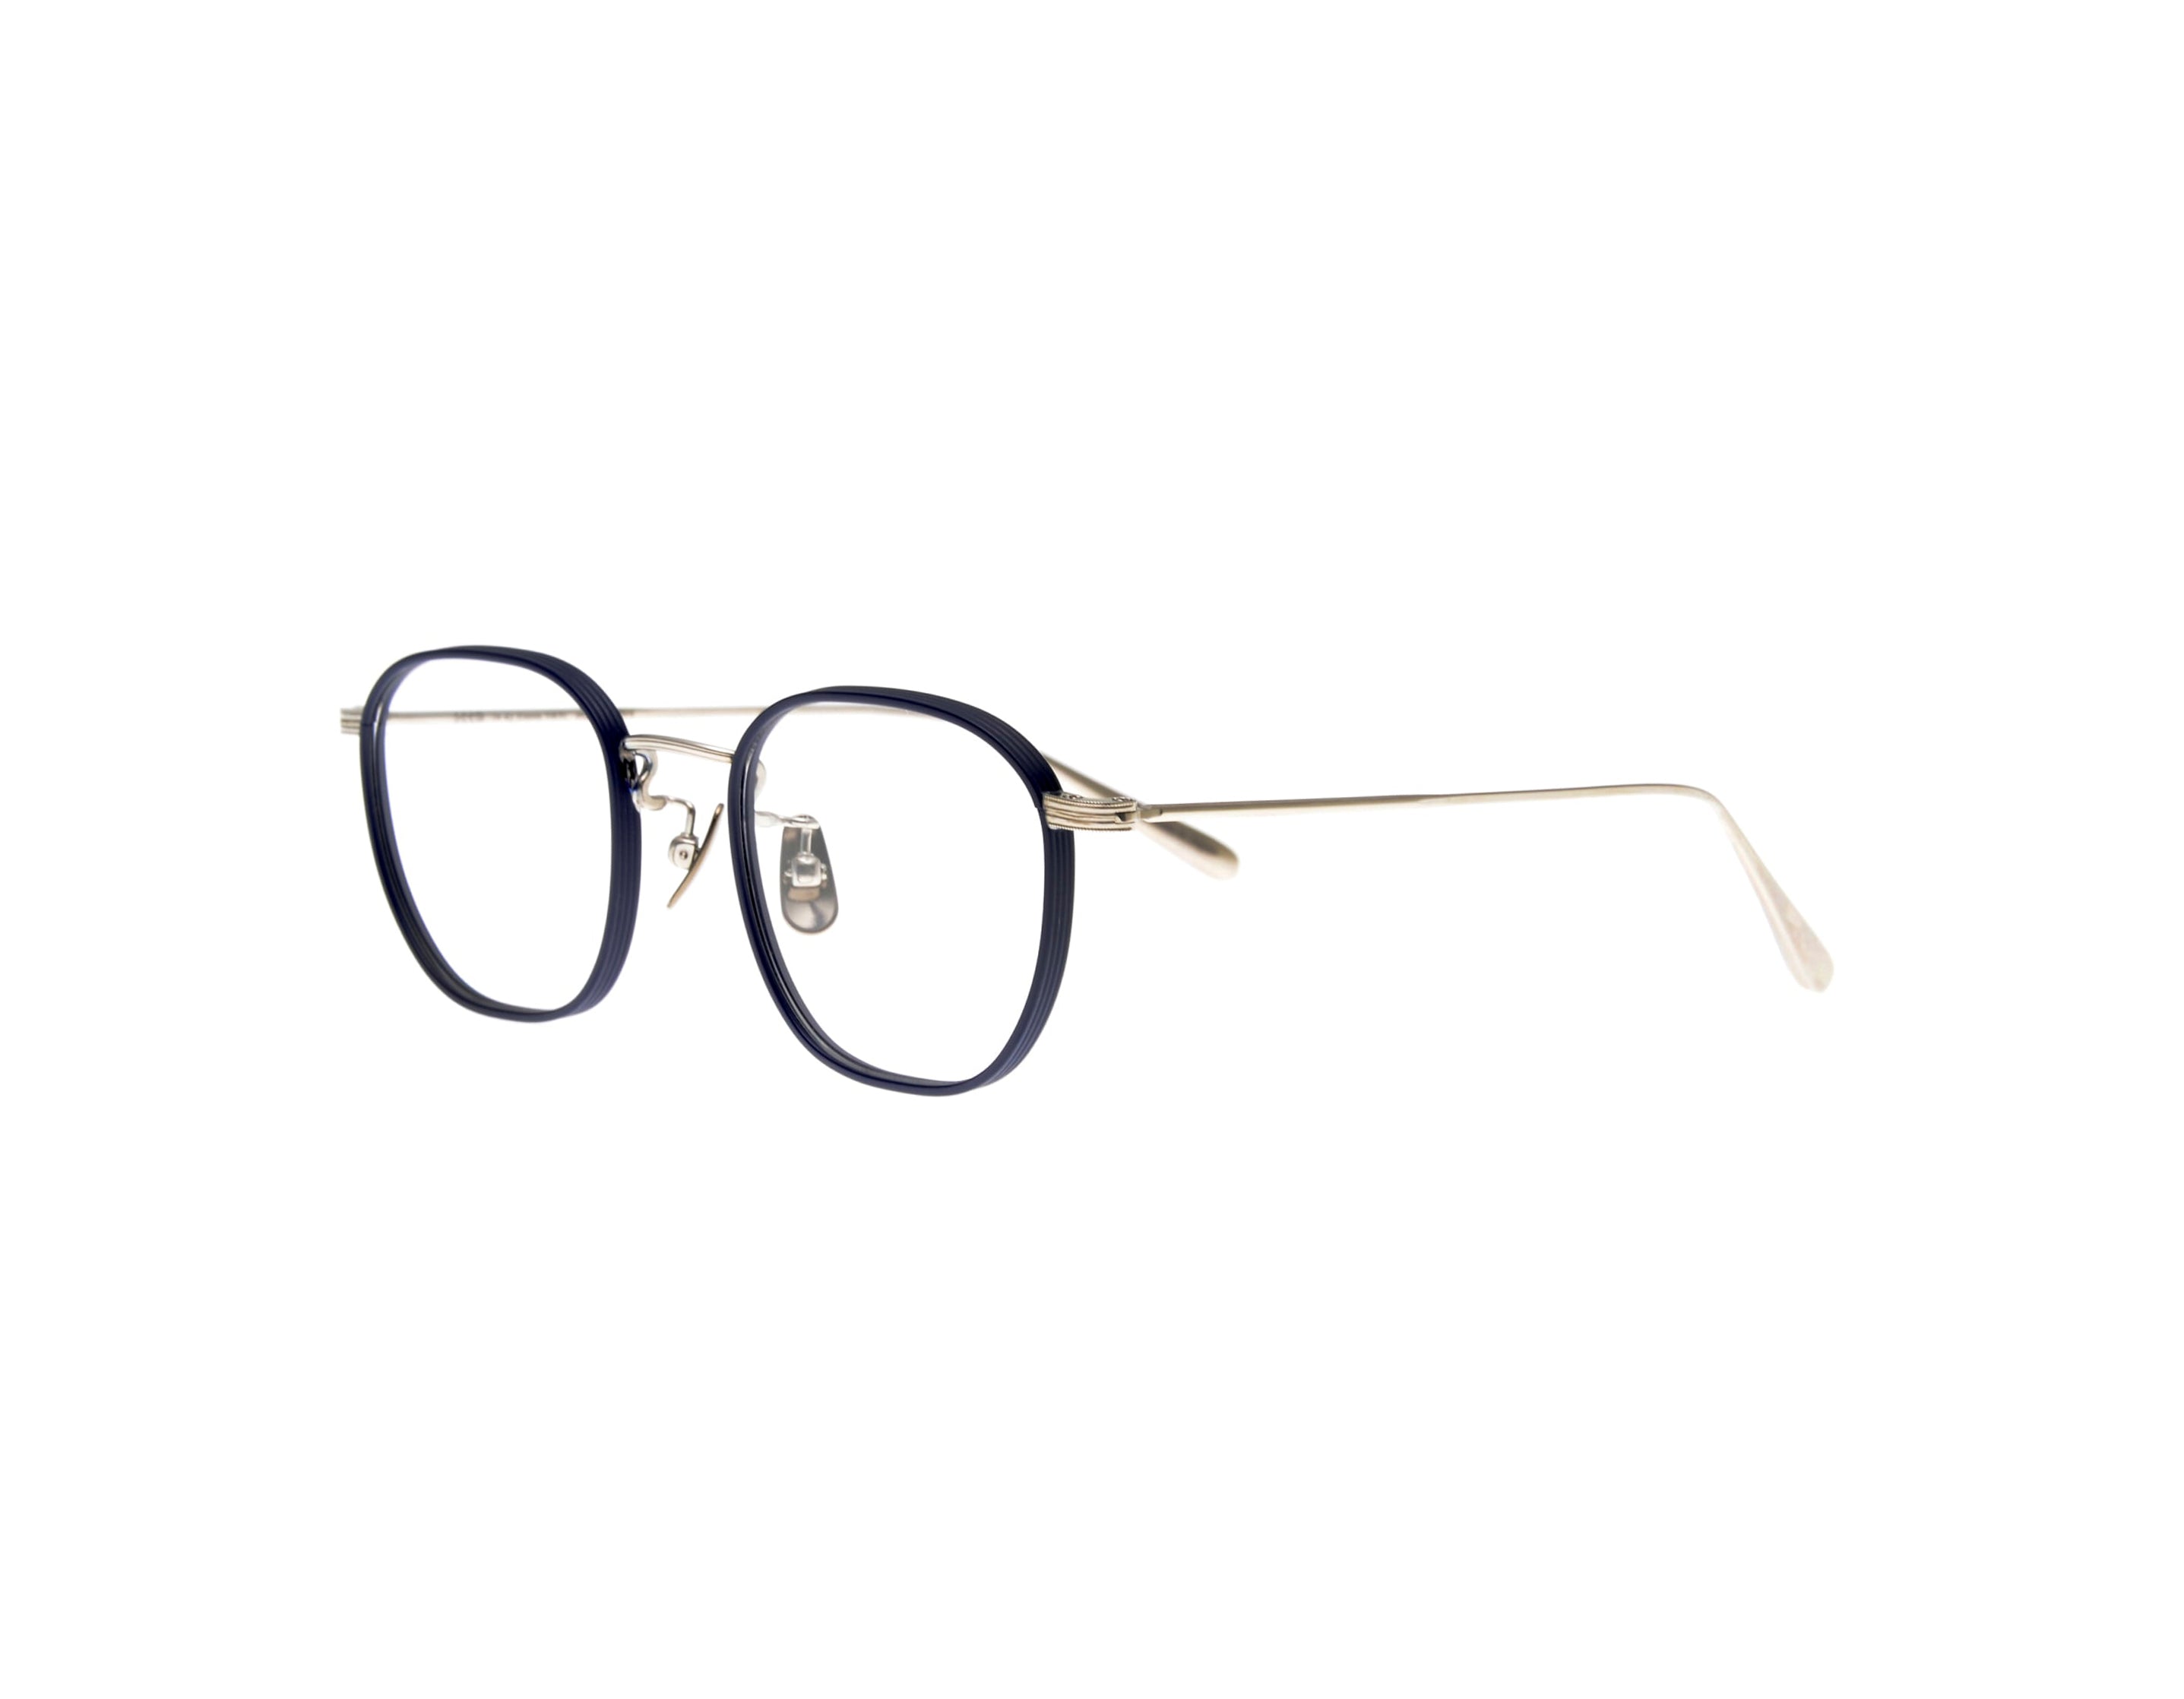 Oh My Glasses - Clifford omg-108-NV-46【Seem Collection】【New】